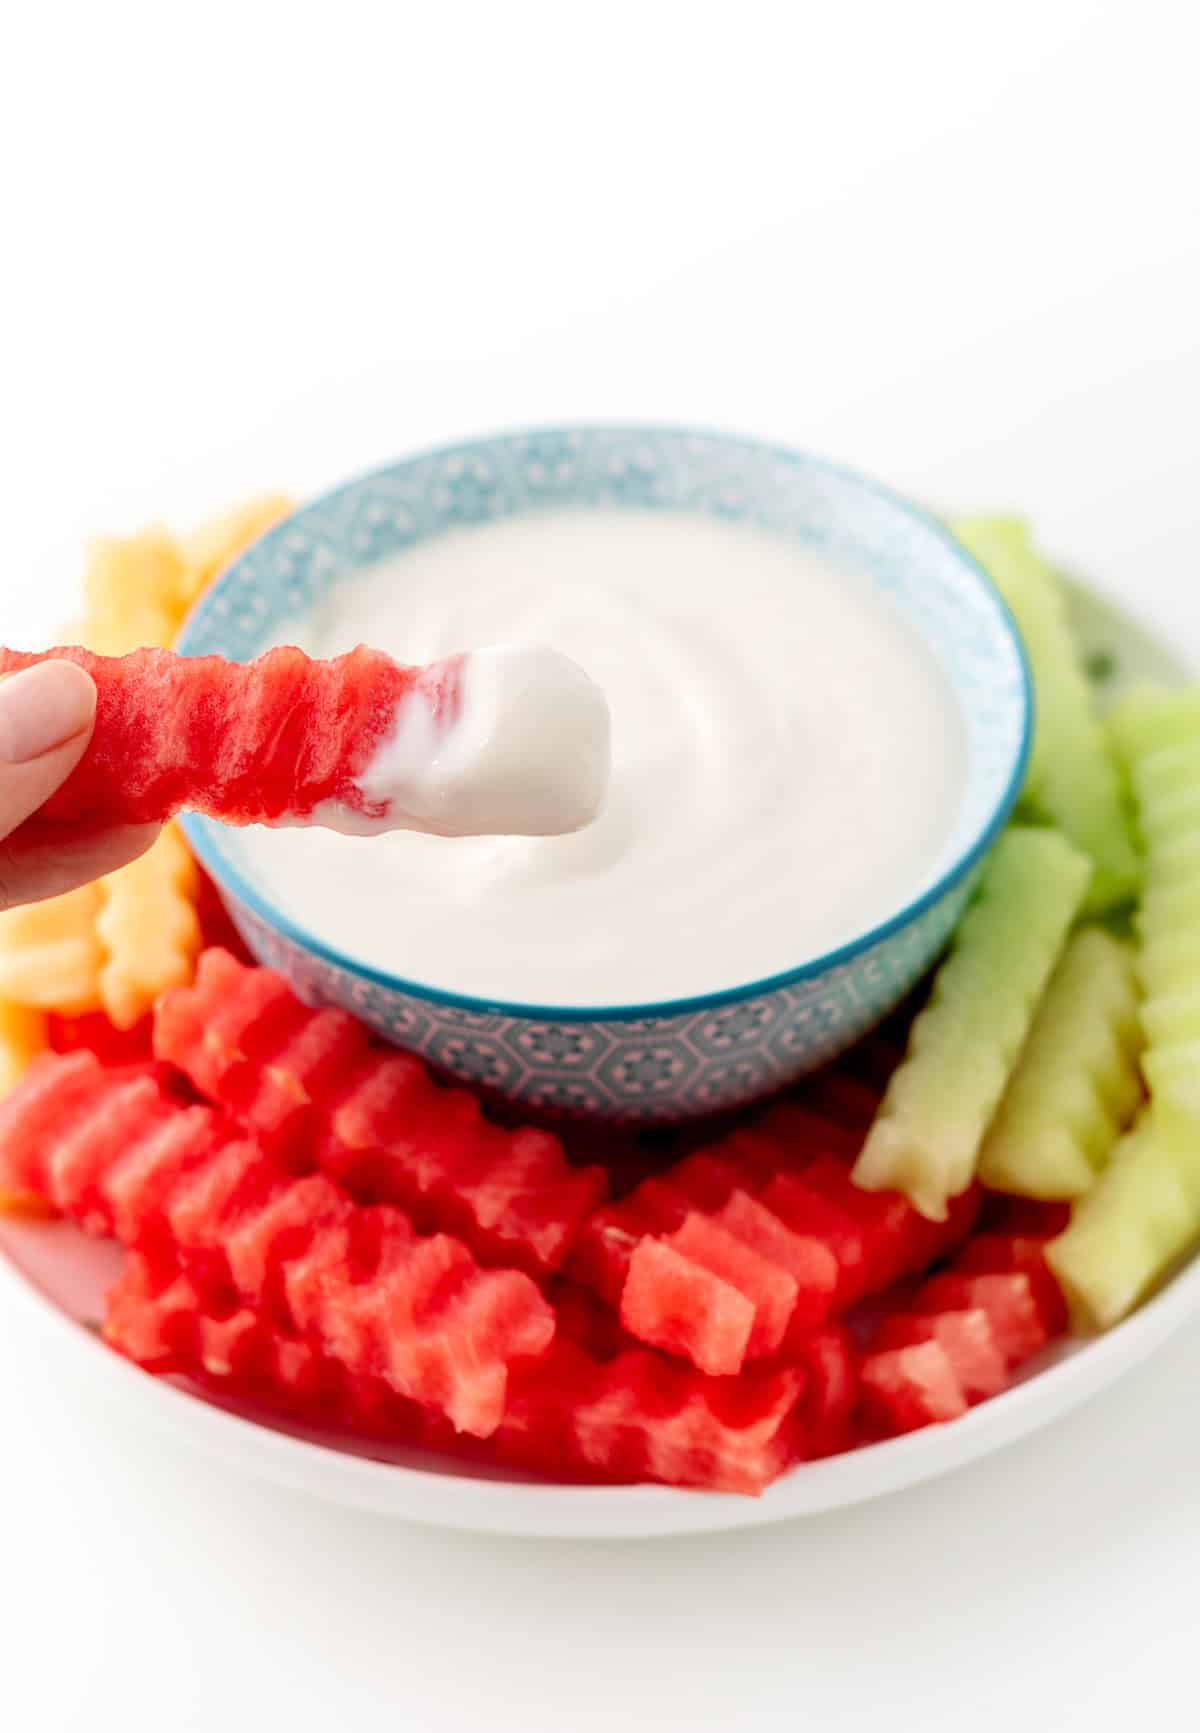 Someone dipping a watermelon fry into a bowl of yogurt dip.